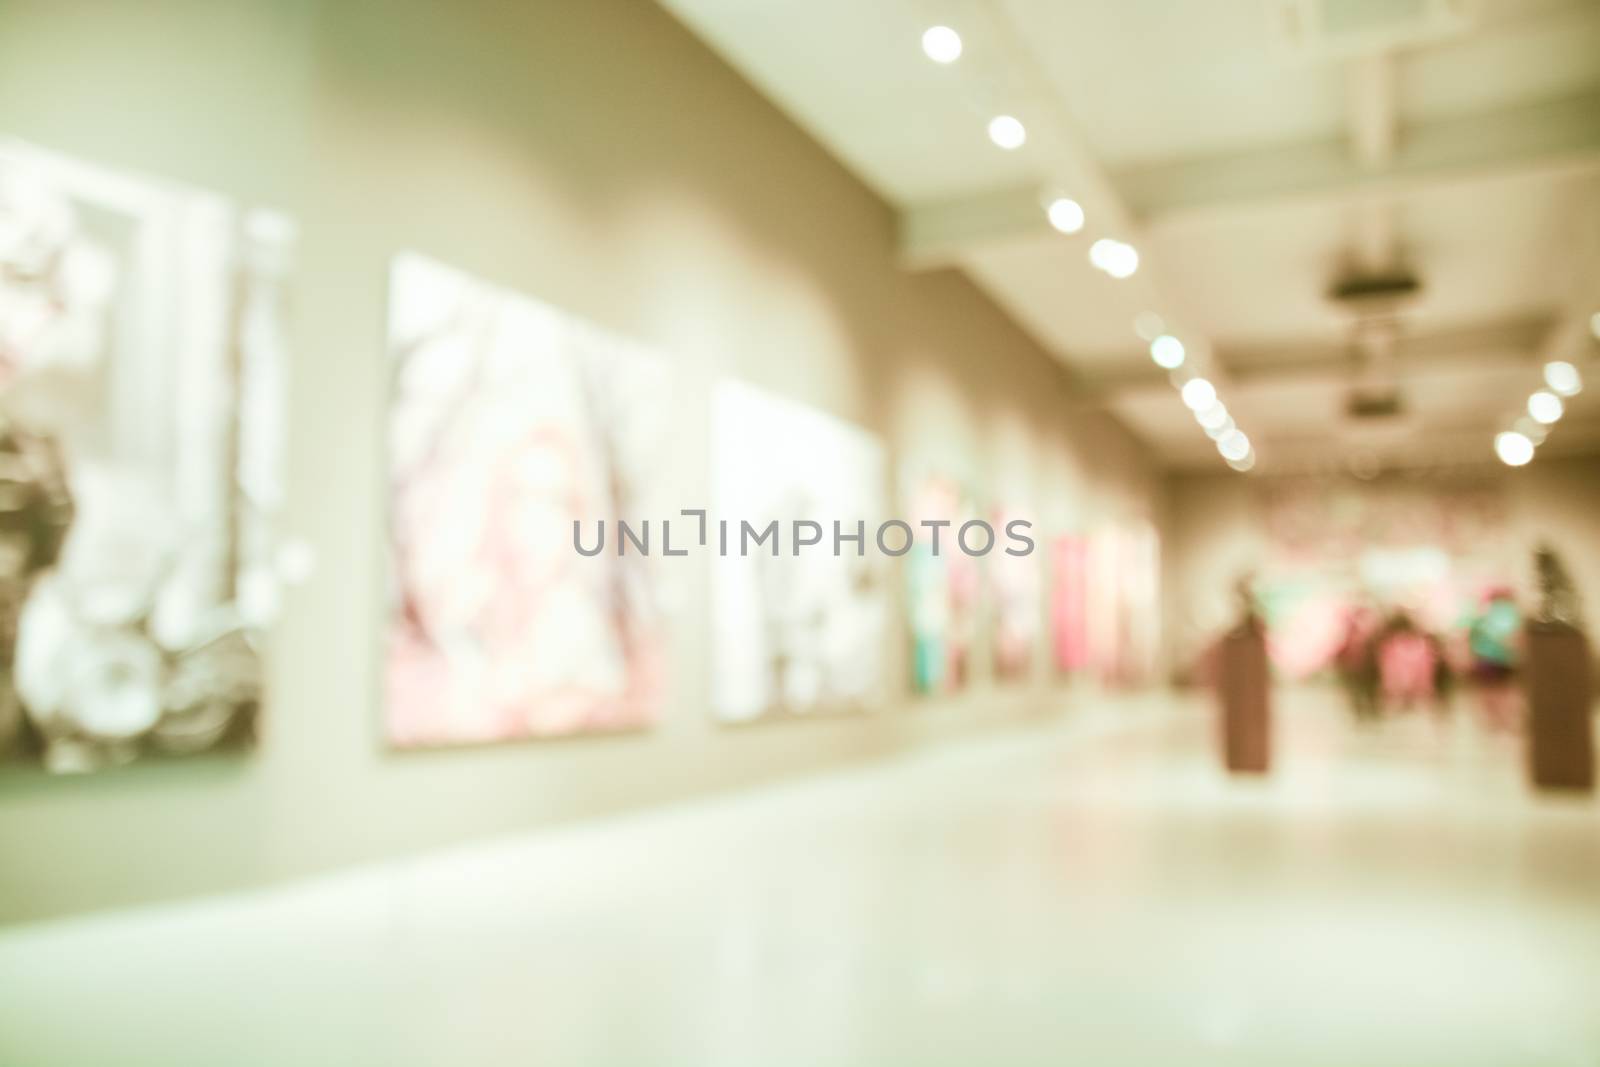 Blur image of lobby of modern art center Museum by thampapon